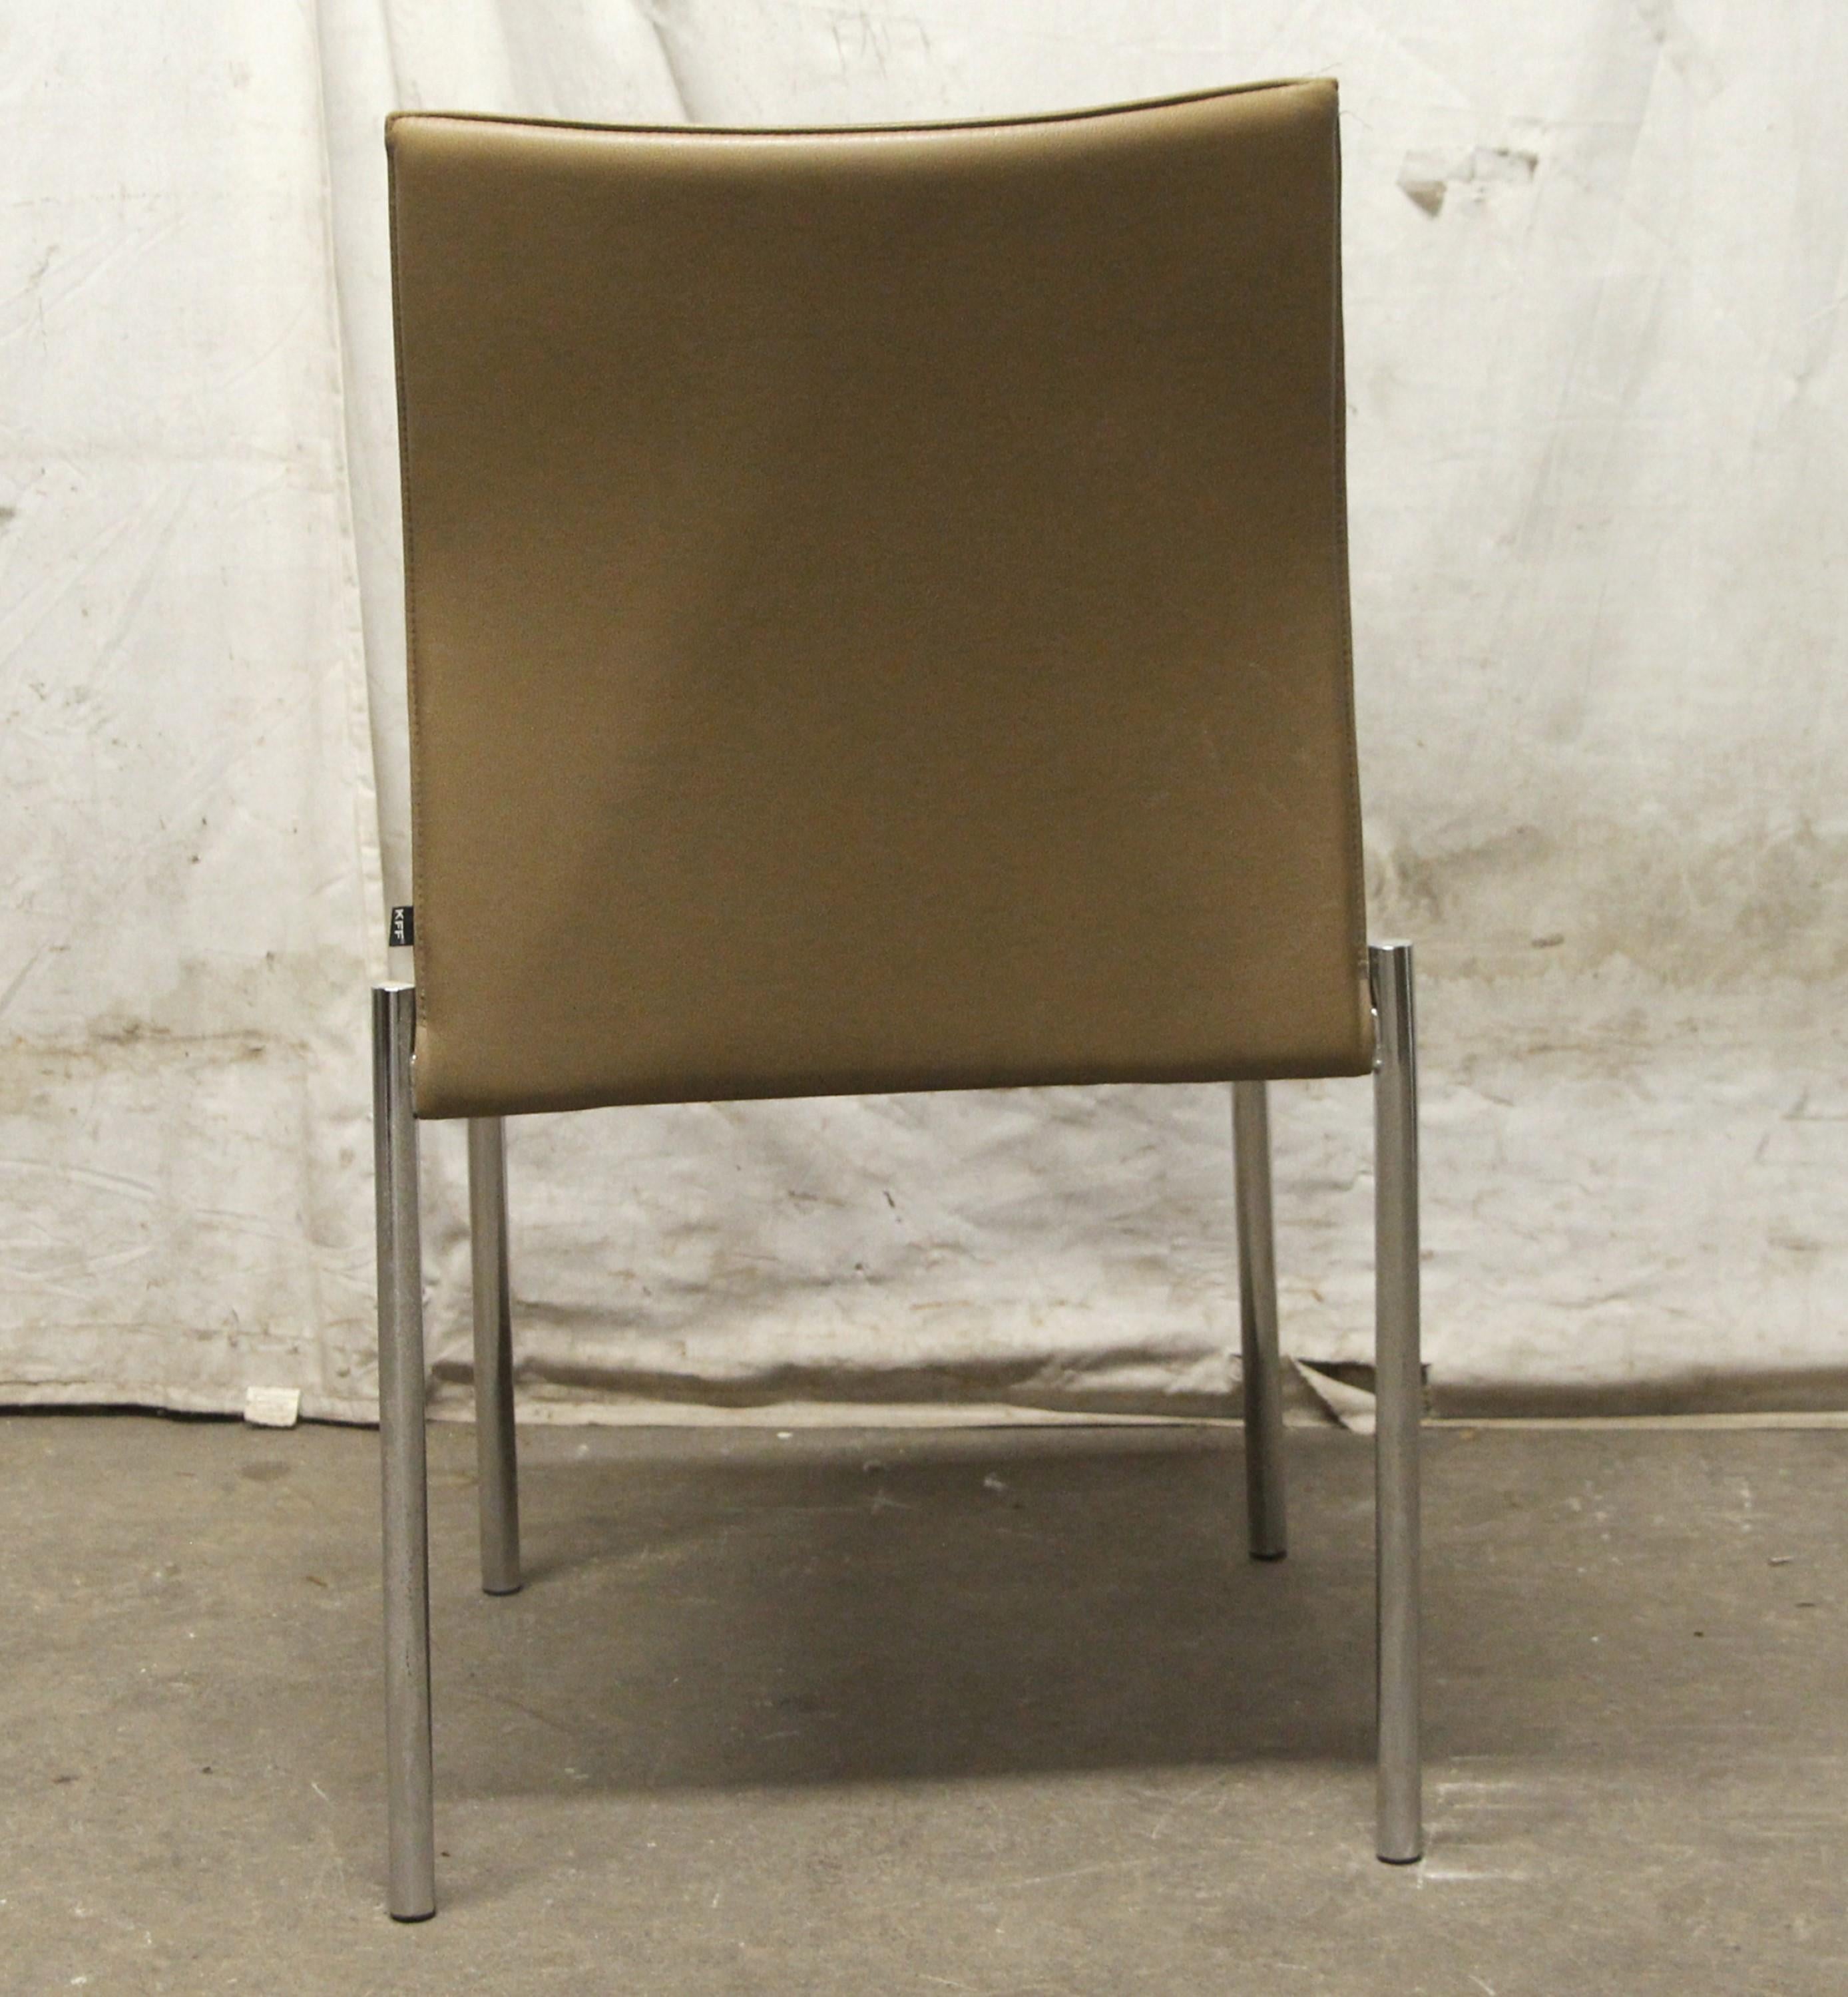 Metal KFF Modern Armless Glooh Chair for Dining or Conference Area, Qty Available